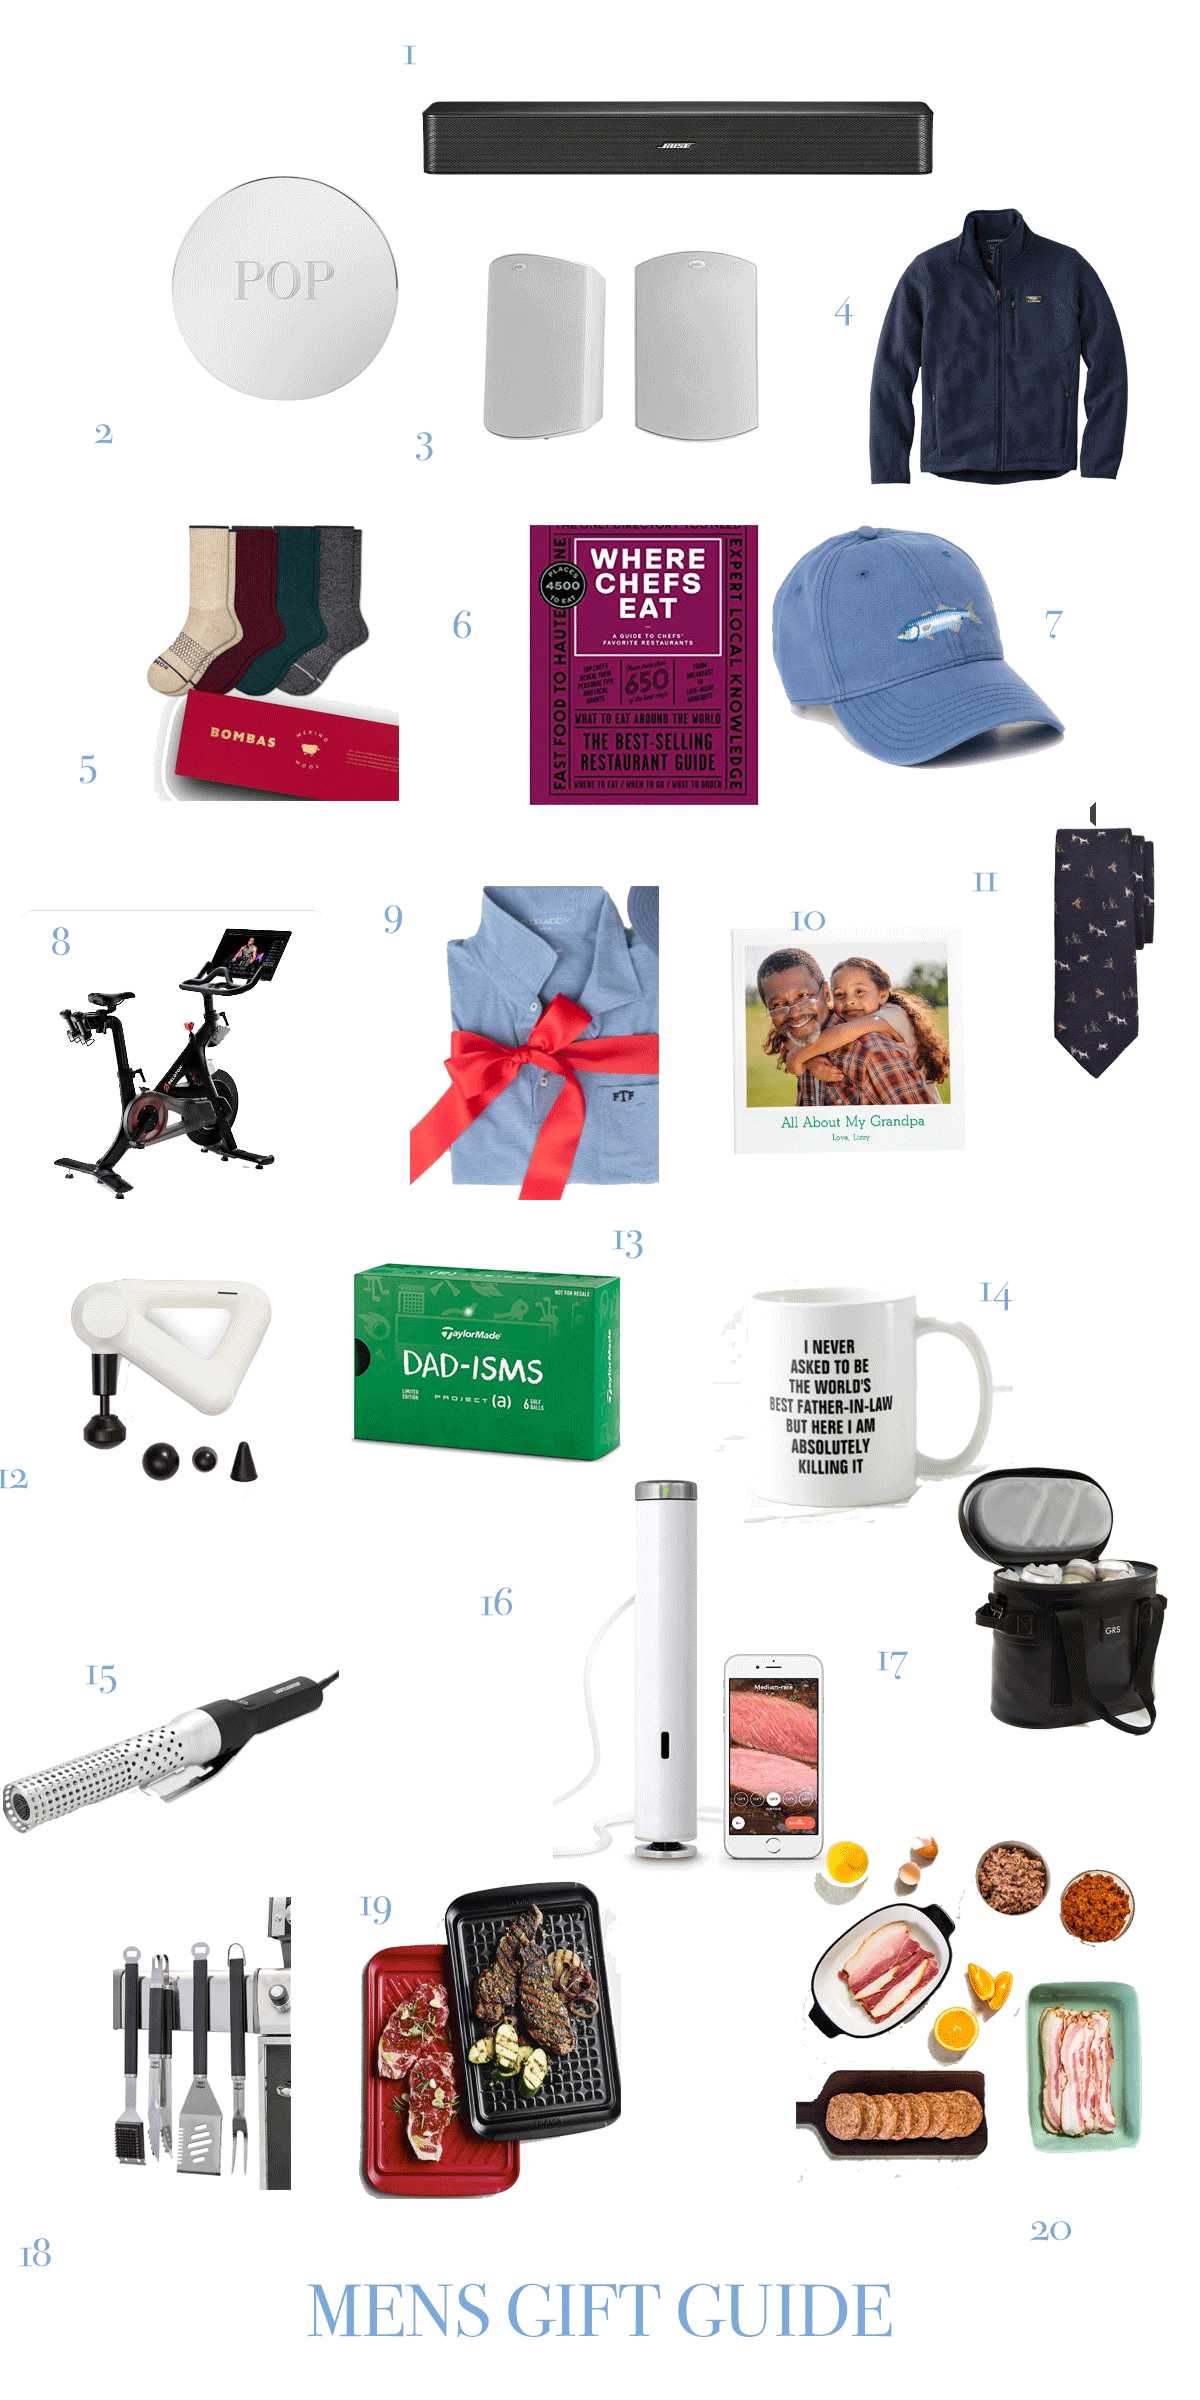 https://sarah-tucker.com/wp-content/uploads/2019/11/MENS-GIFT-GUIDE-father-in-law.png